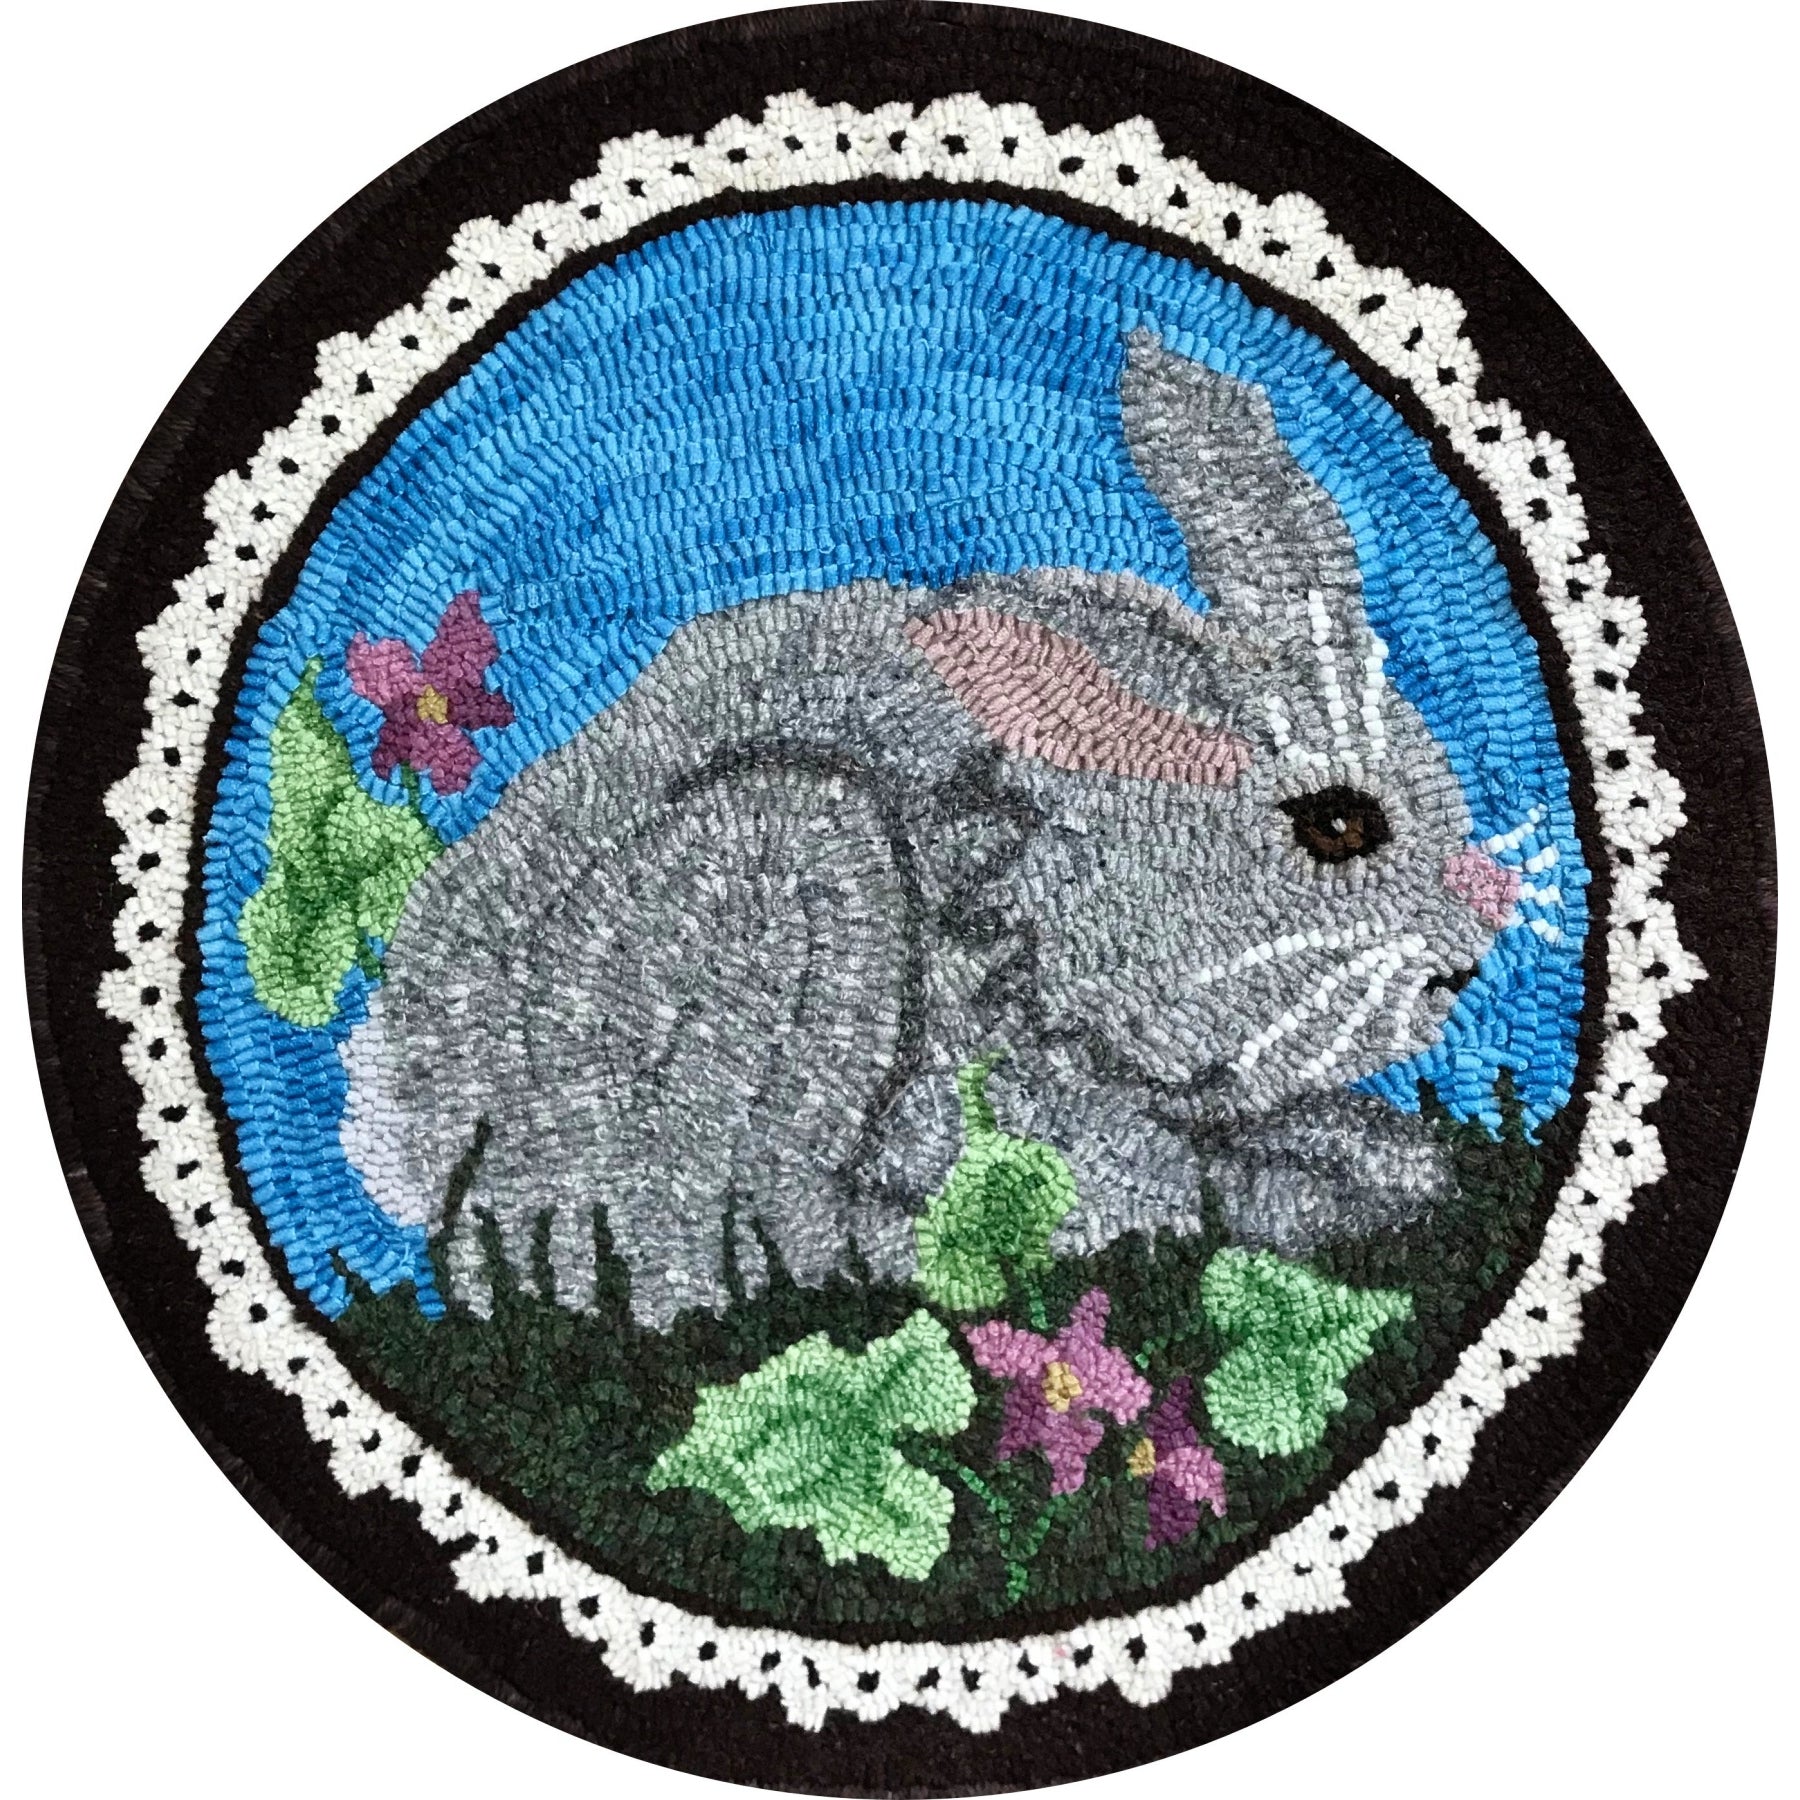 Bunny, rug hooked by Margaret Bedle